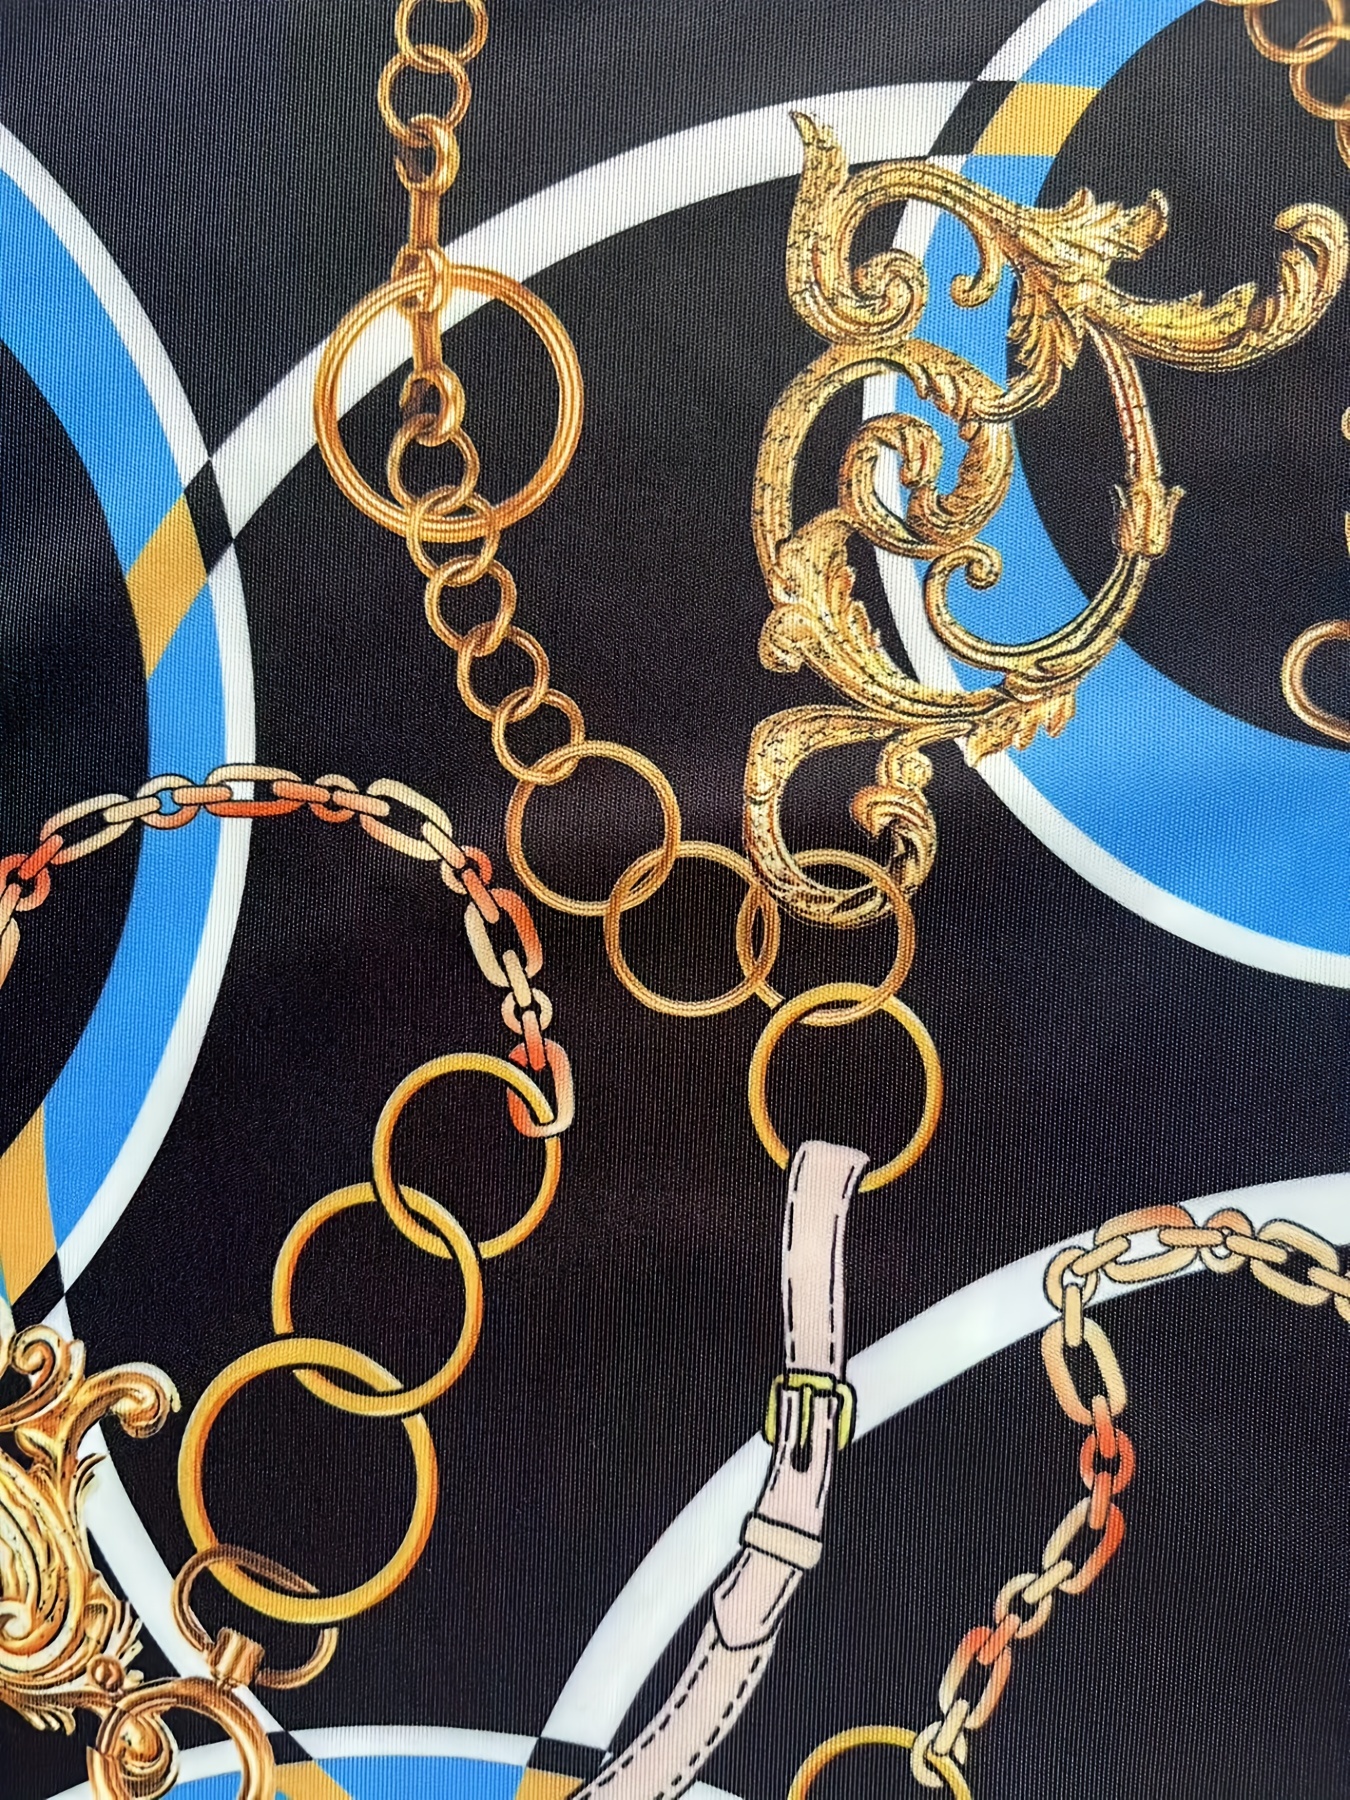 Golden baroque with chains on blue background. versace style